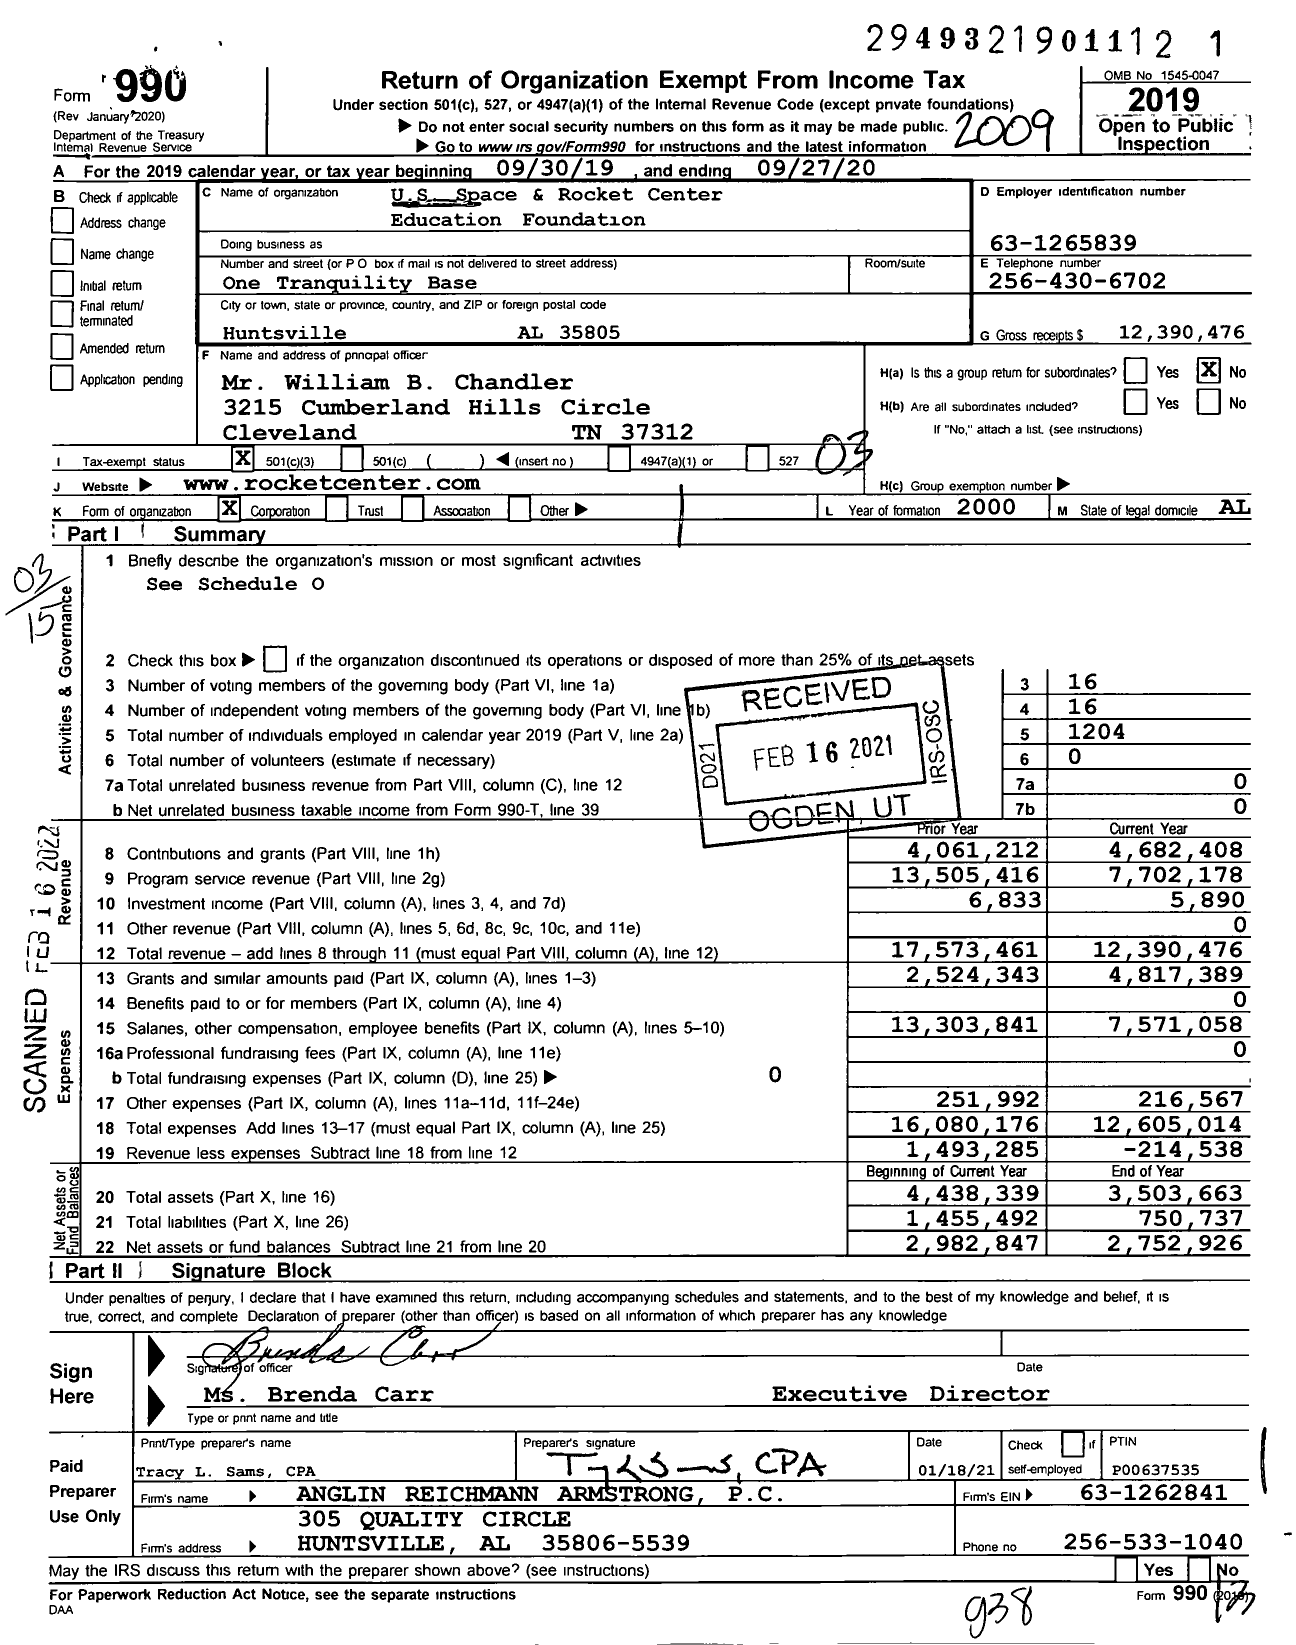 Image of first page of 2019 Form 990 for US Space & Rocket Center Foundation